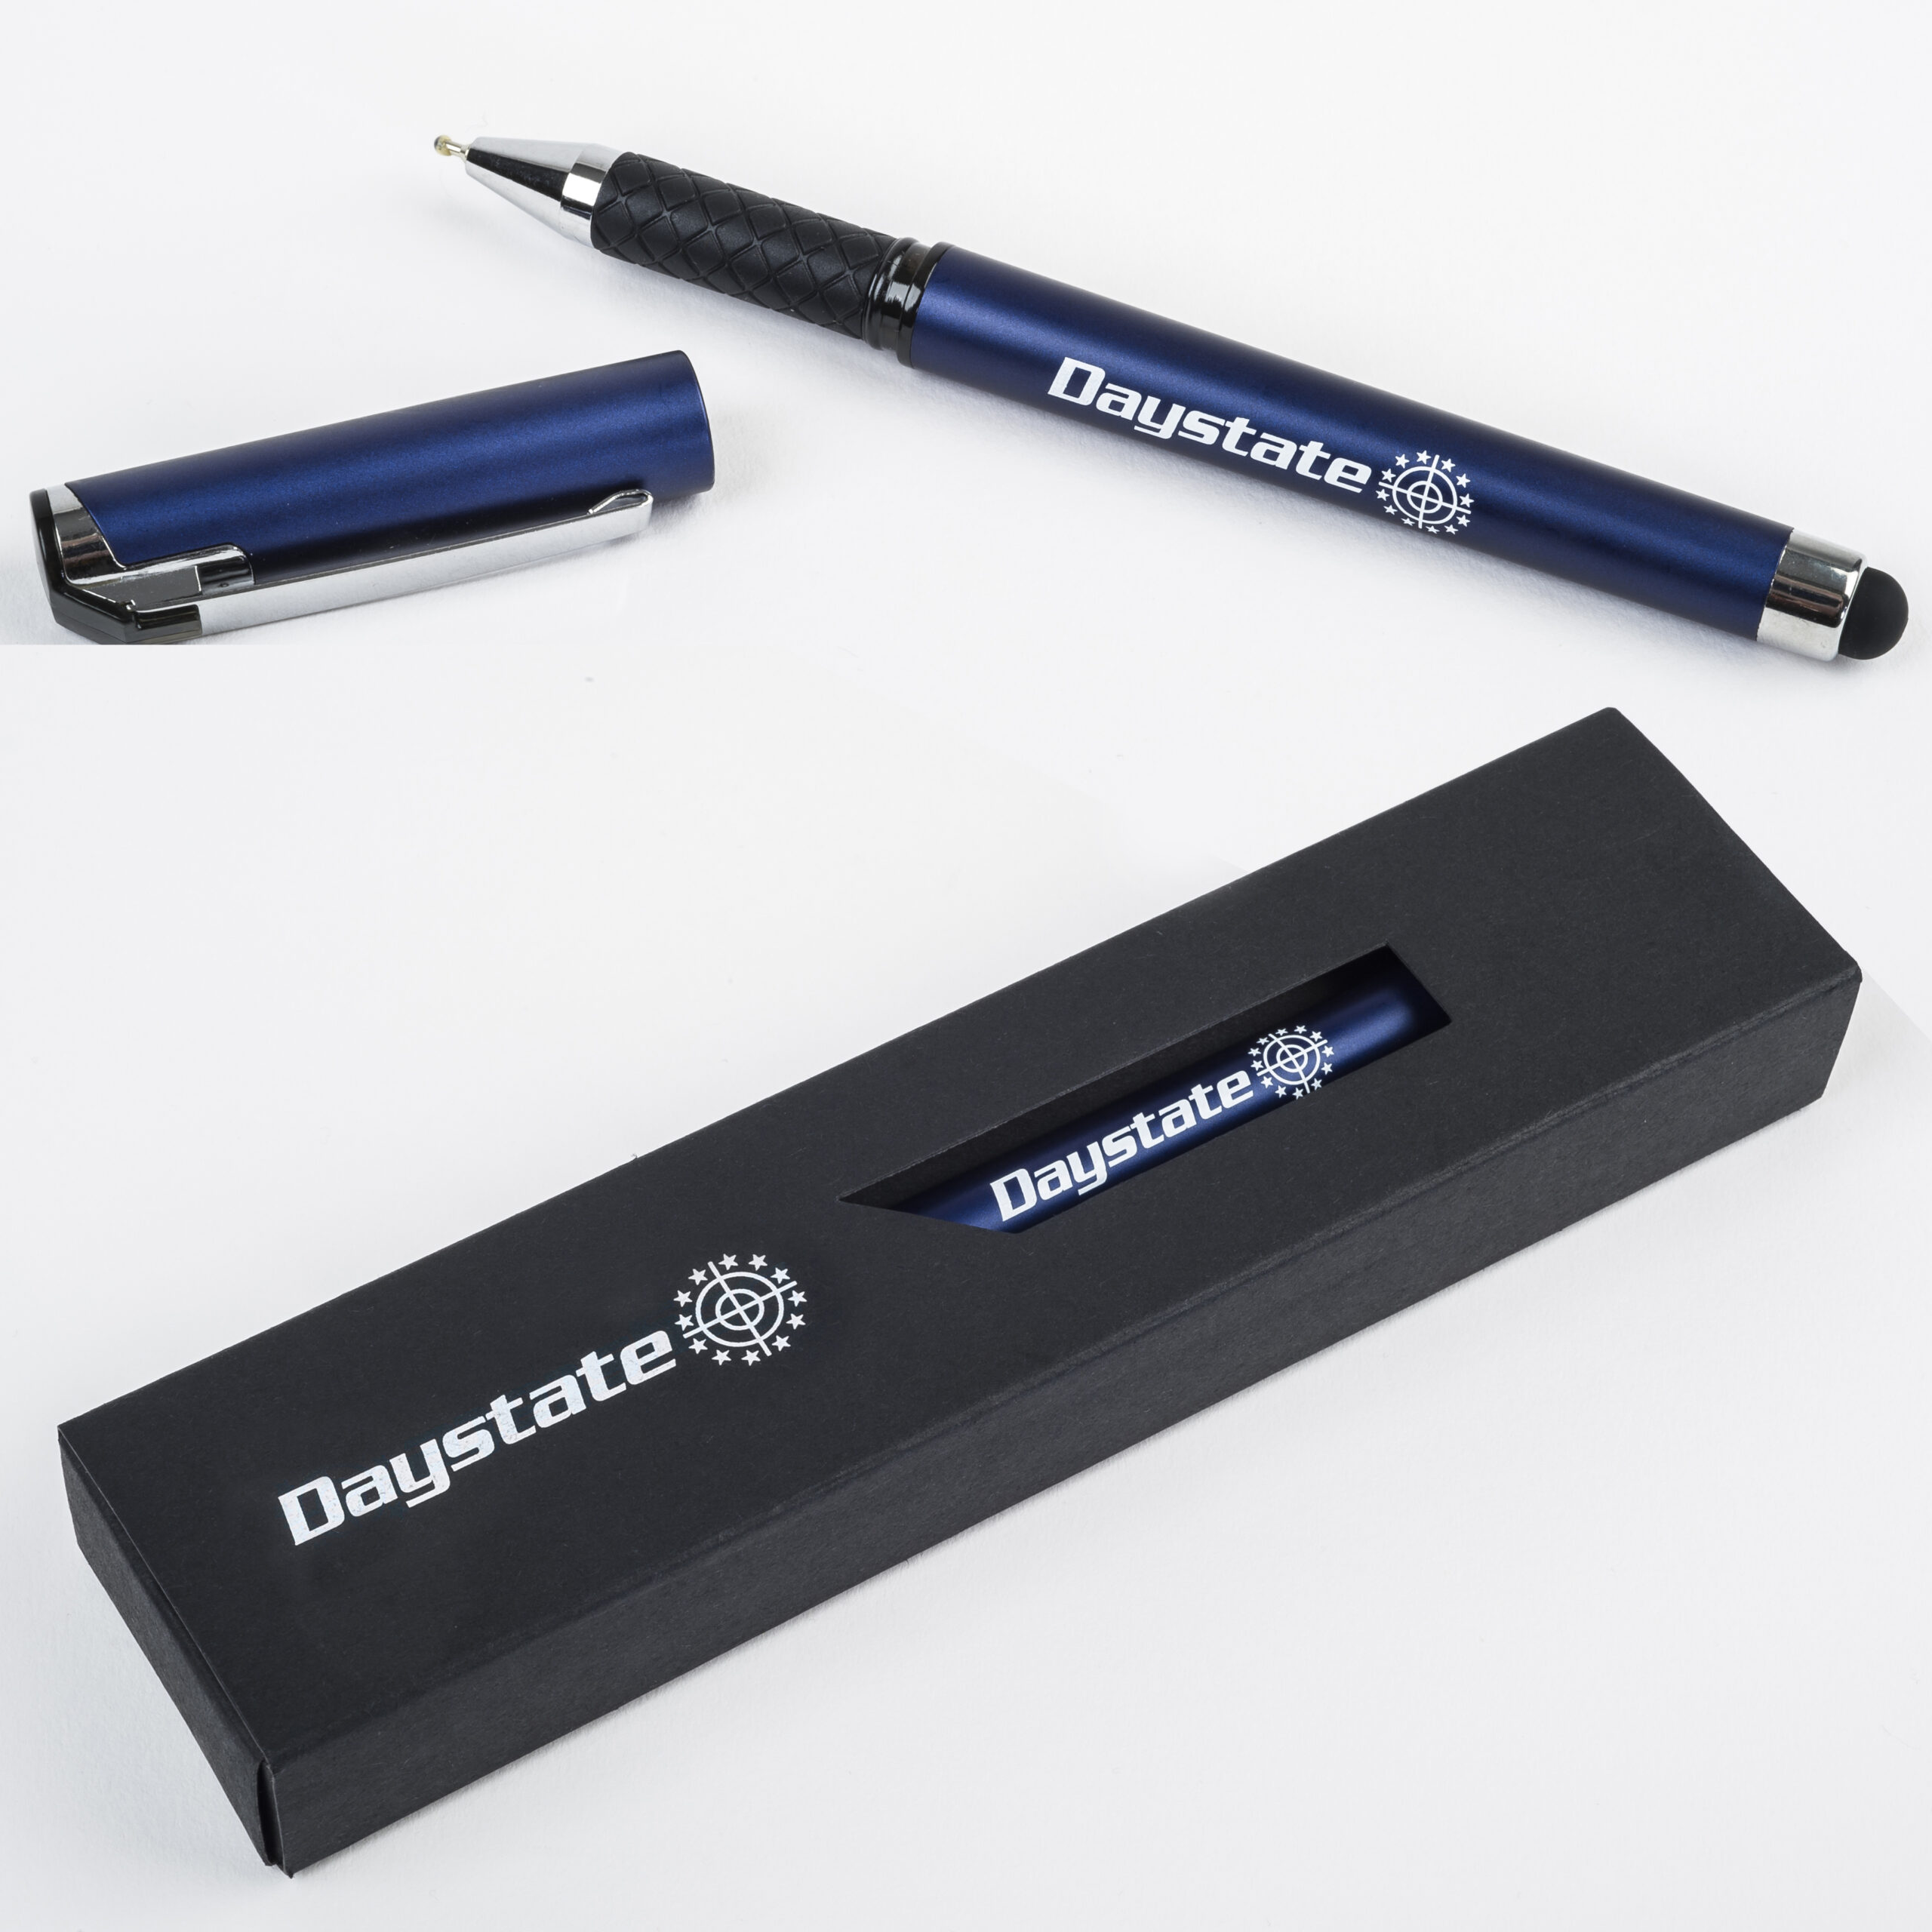 Daystate Pen with Stylus - the perfect gift for the smartphone shooter